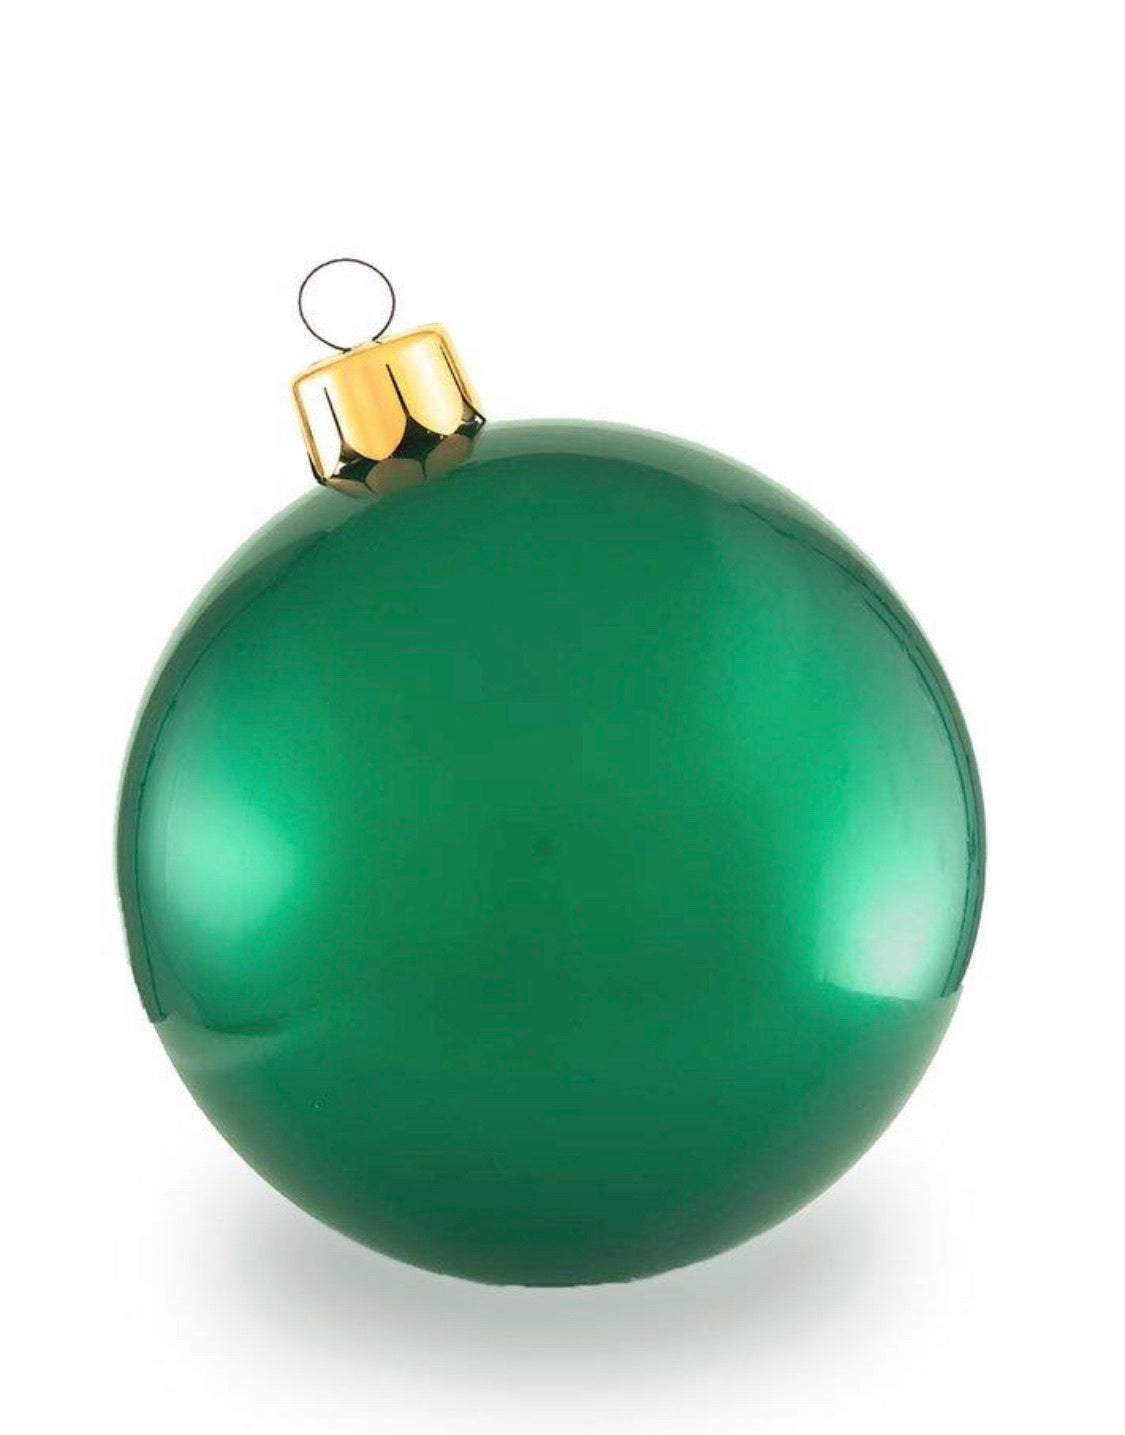 18” Inflatable Ornament